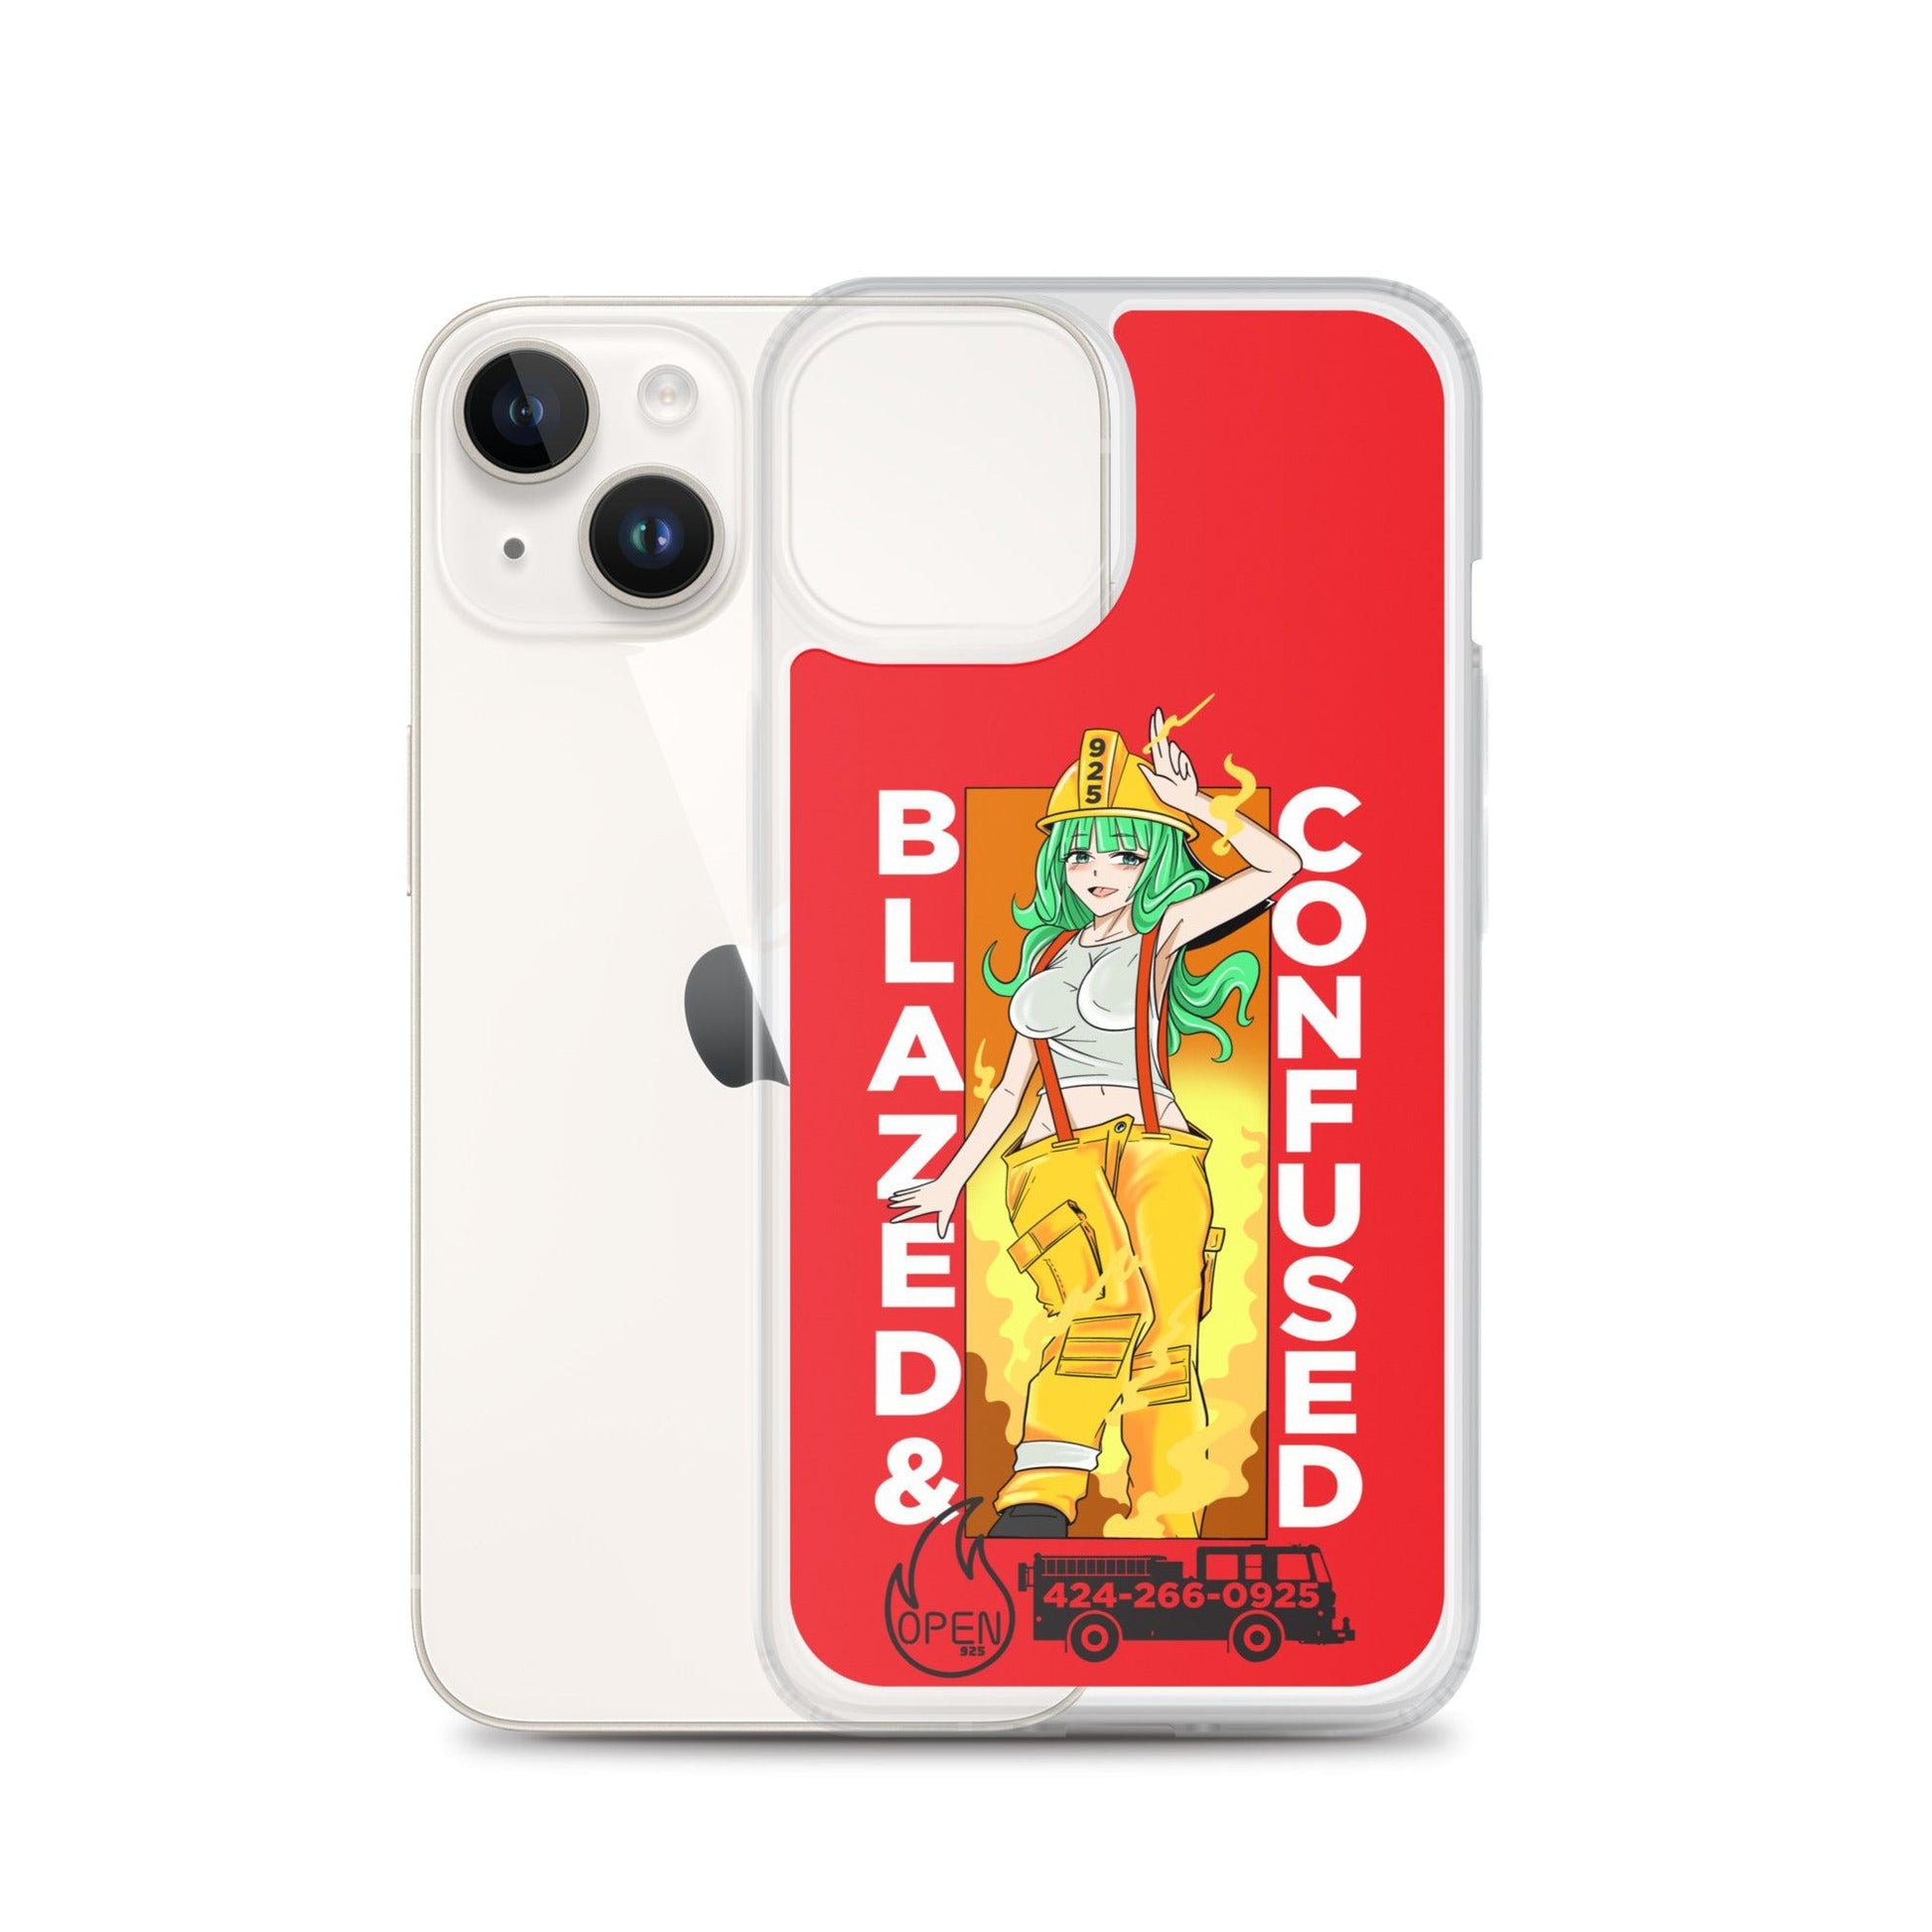 Blazed Case for iPhone®-Open 925